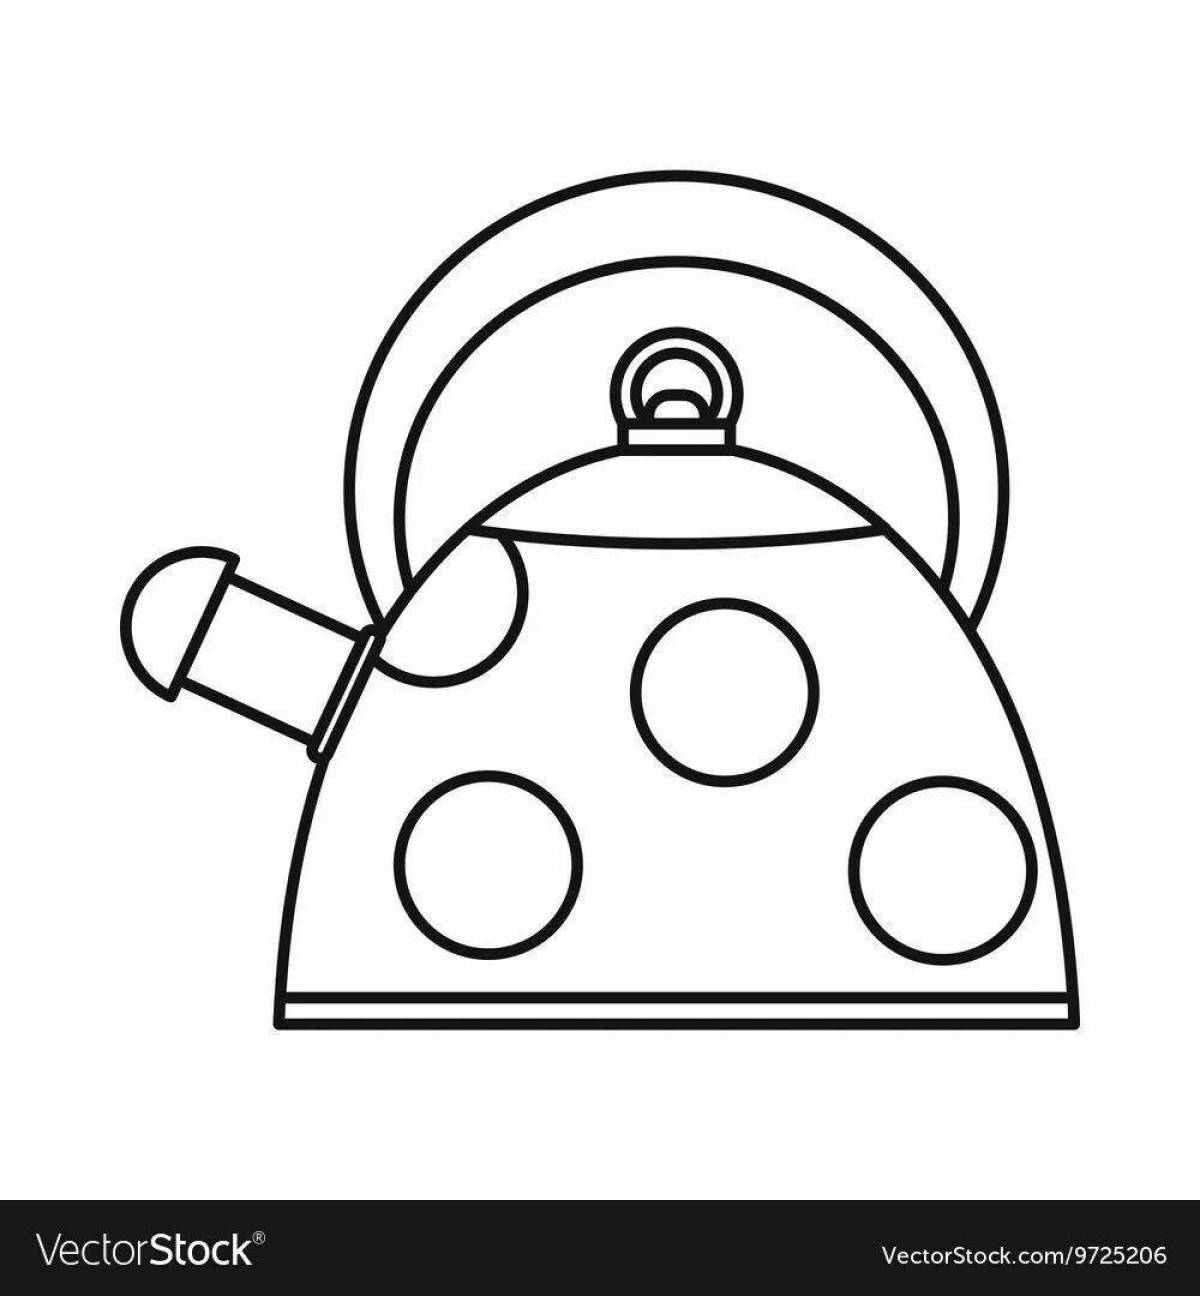 Coloring book with a teapot for children 2-3 years old